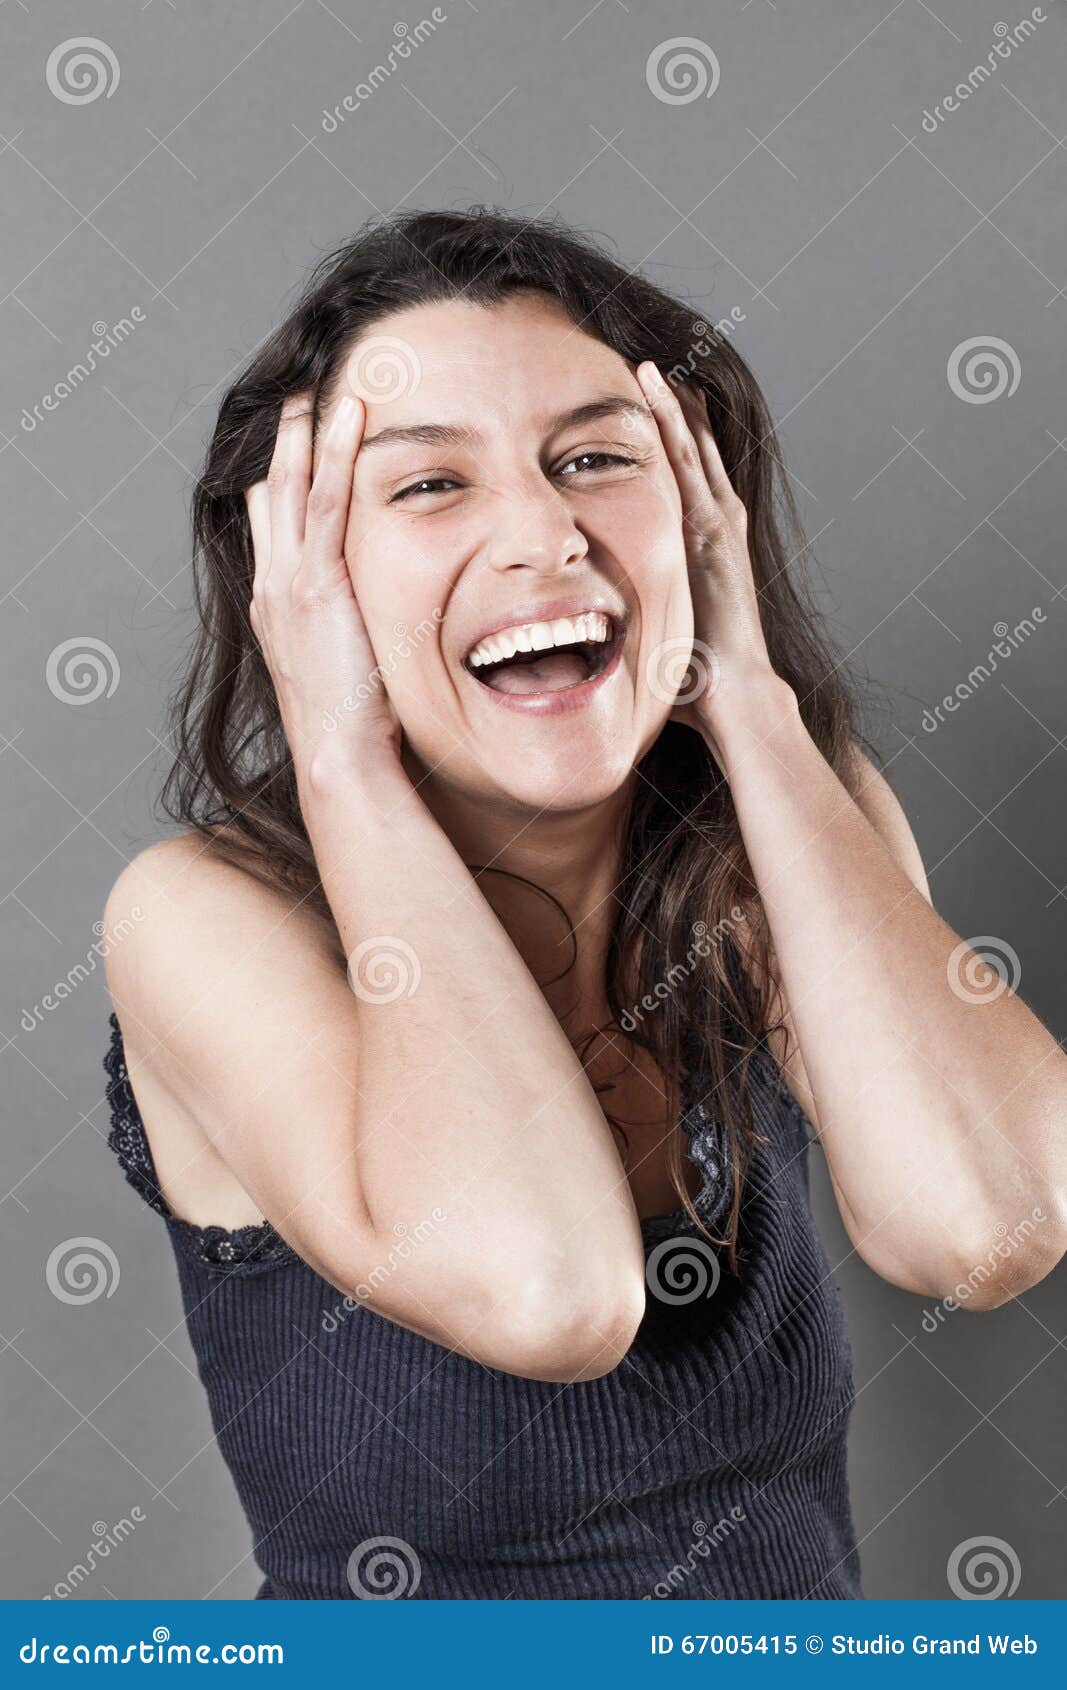 joyous young woman bursting out laughing